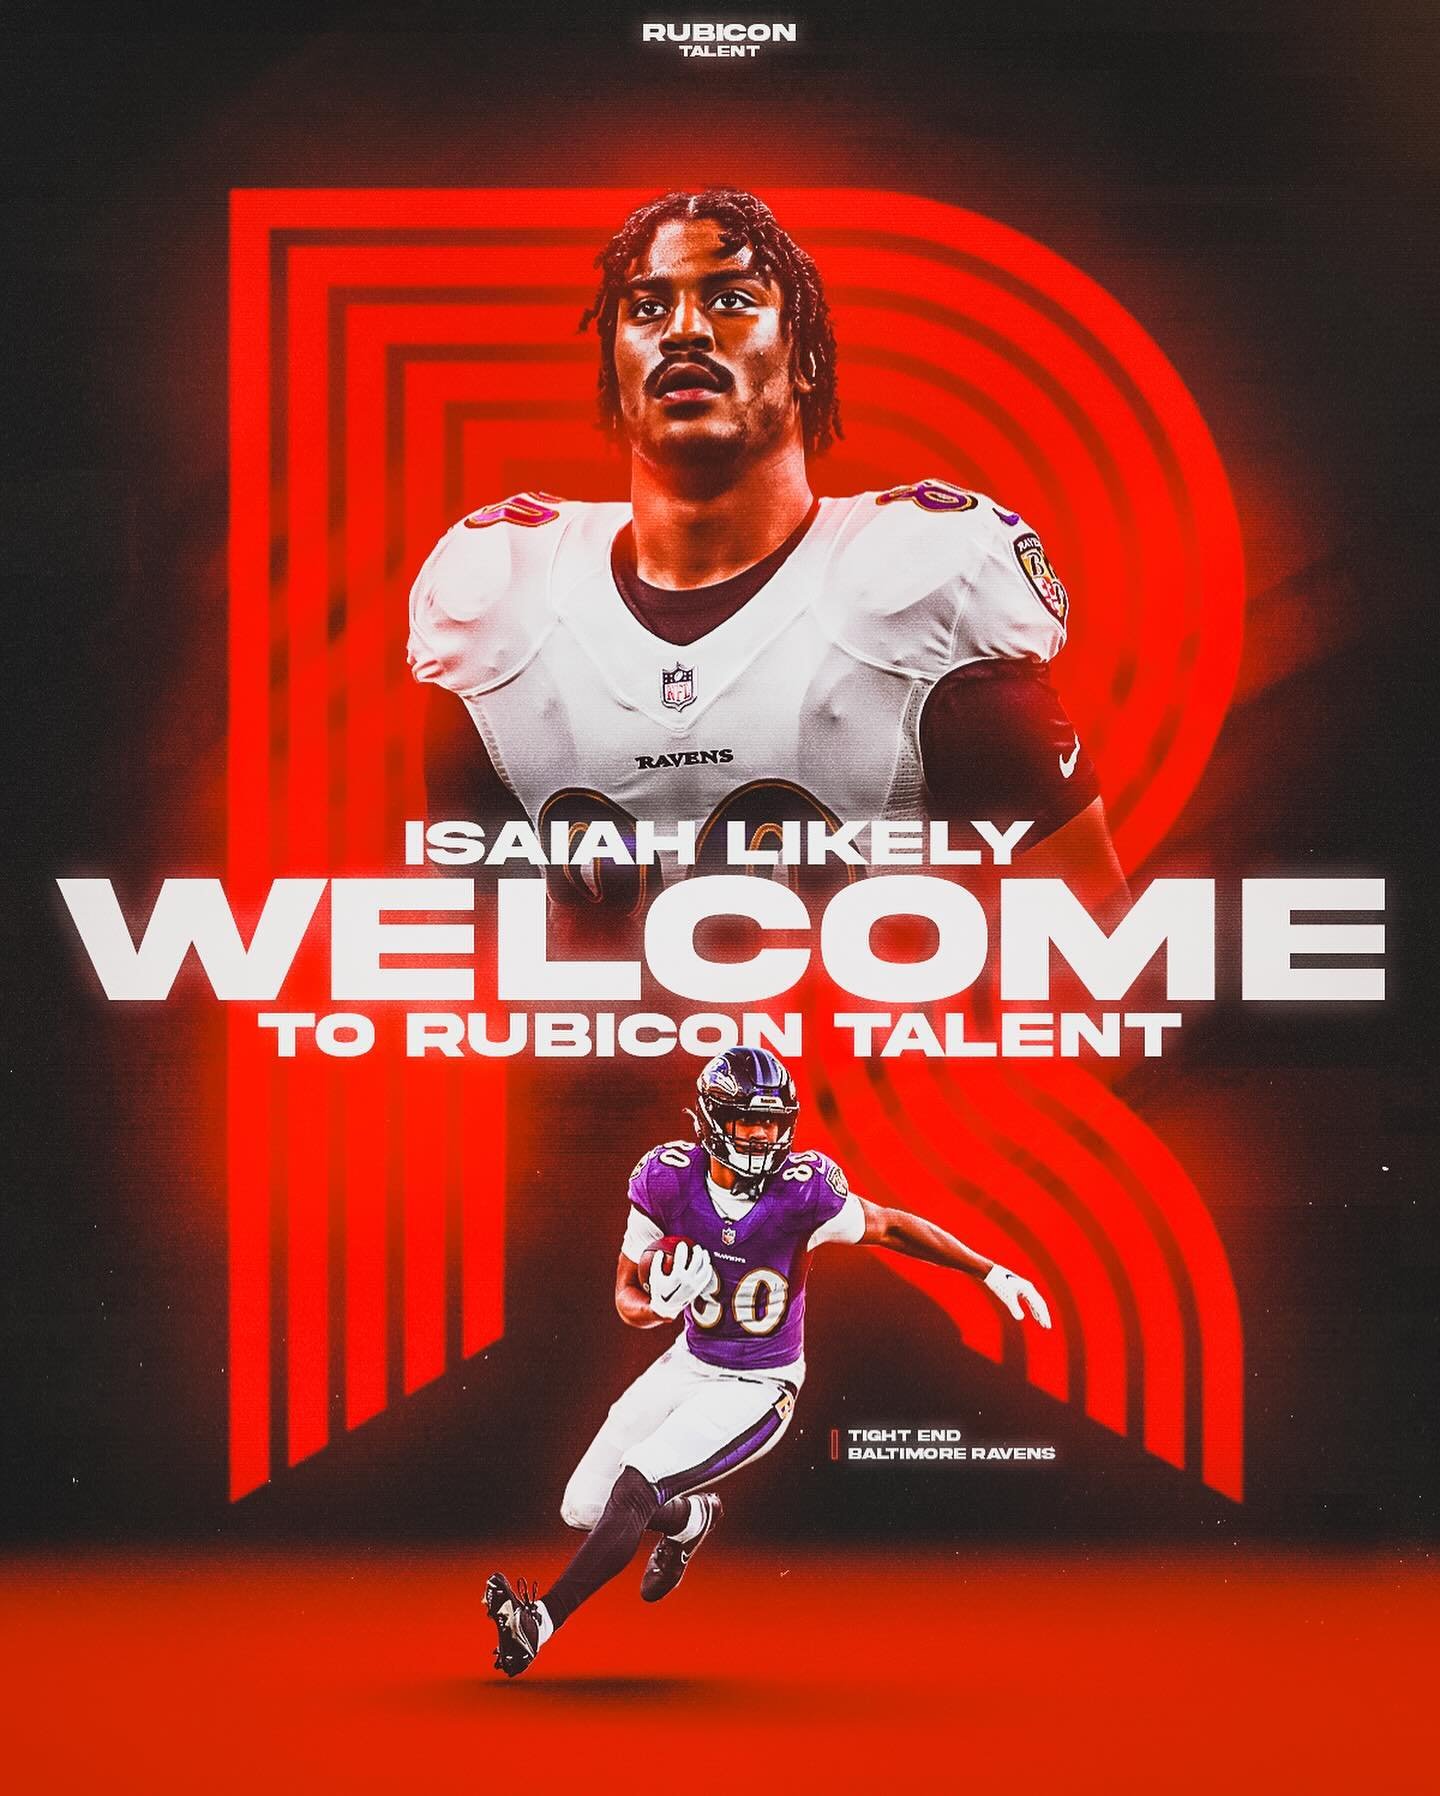 We are very excited to welcome Baltimore Ravens TE @isaiahlikely_4 to Rubicon Talent! We will be working with Isaiah on all of his off-the-field business endeavors, brand marketing, and charitable initiatives‼️

p.s. HAPPY BIRTHDAY ISAIAH🥳